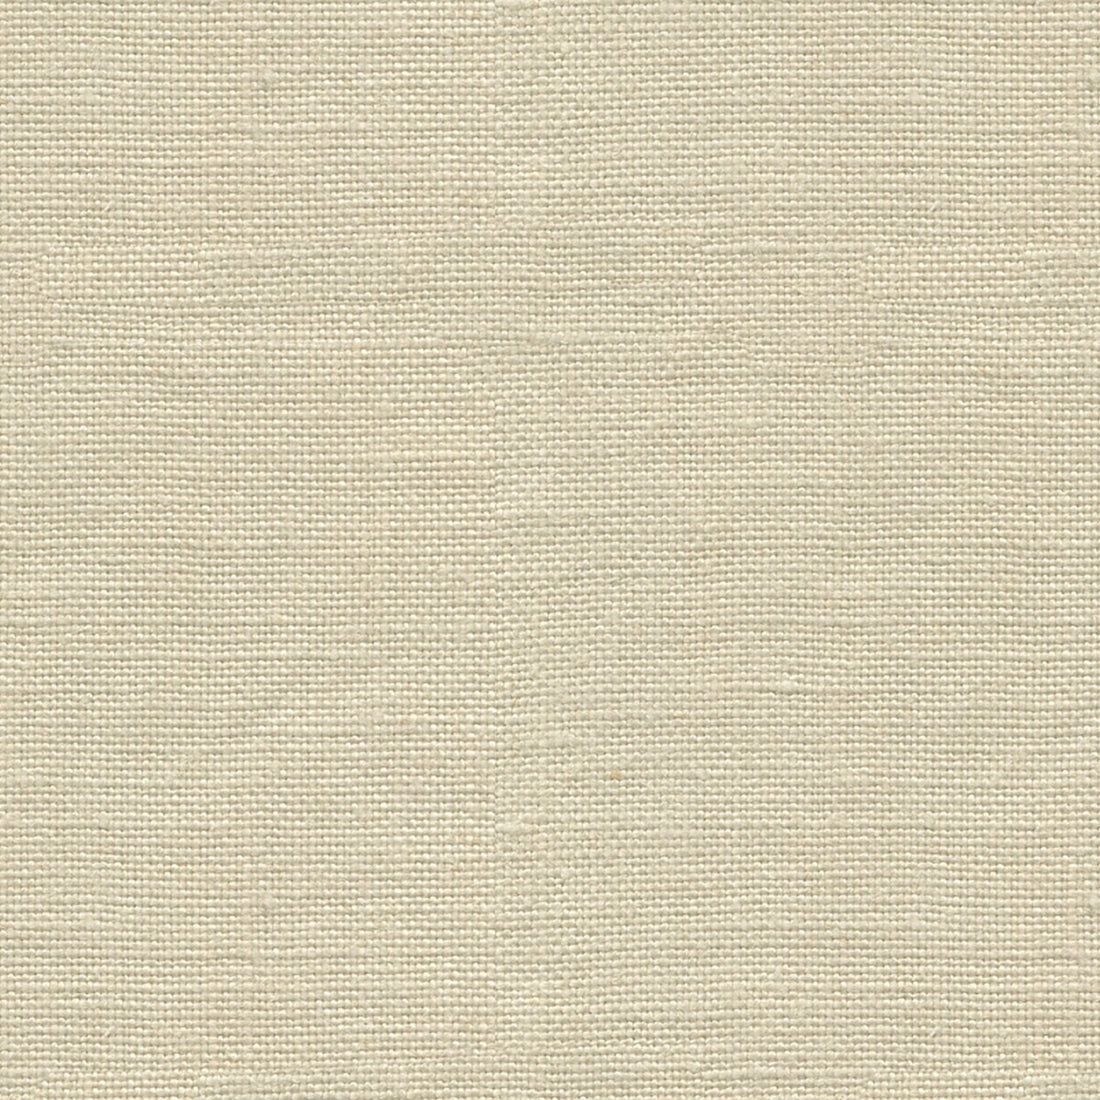 Newport fabric in parchment color - pattern ED85116.225.0 - by Threads in the Variation collection